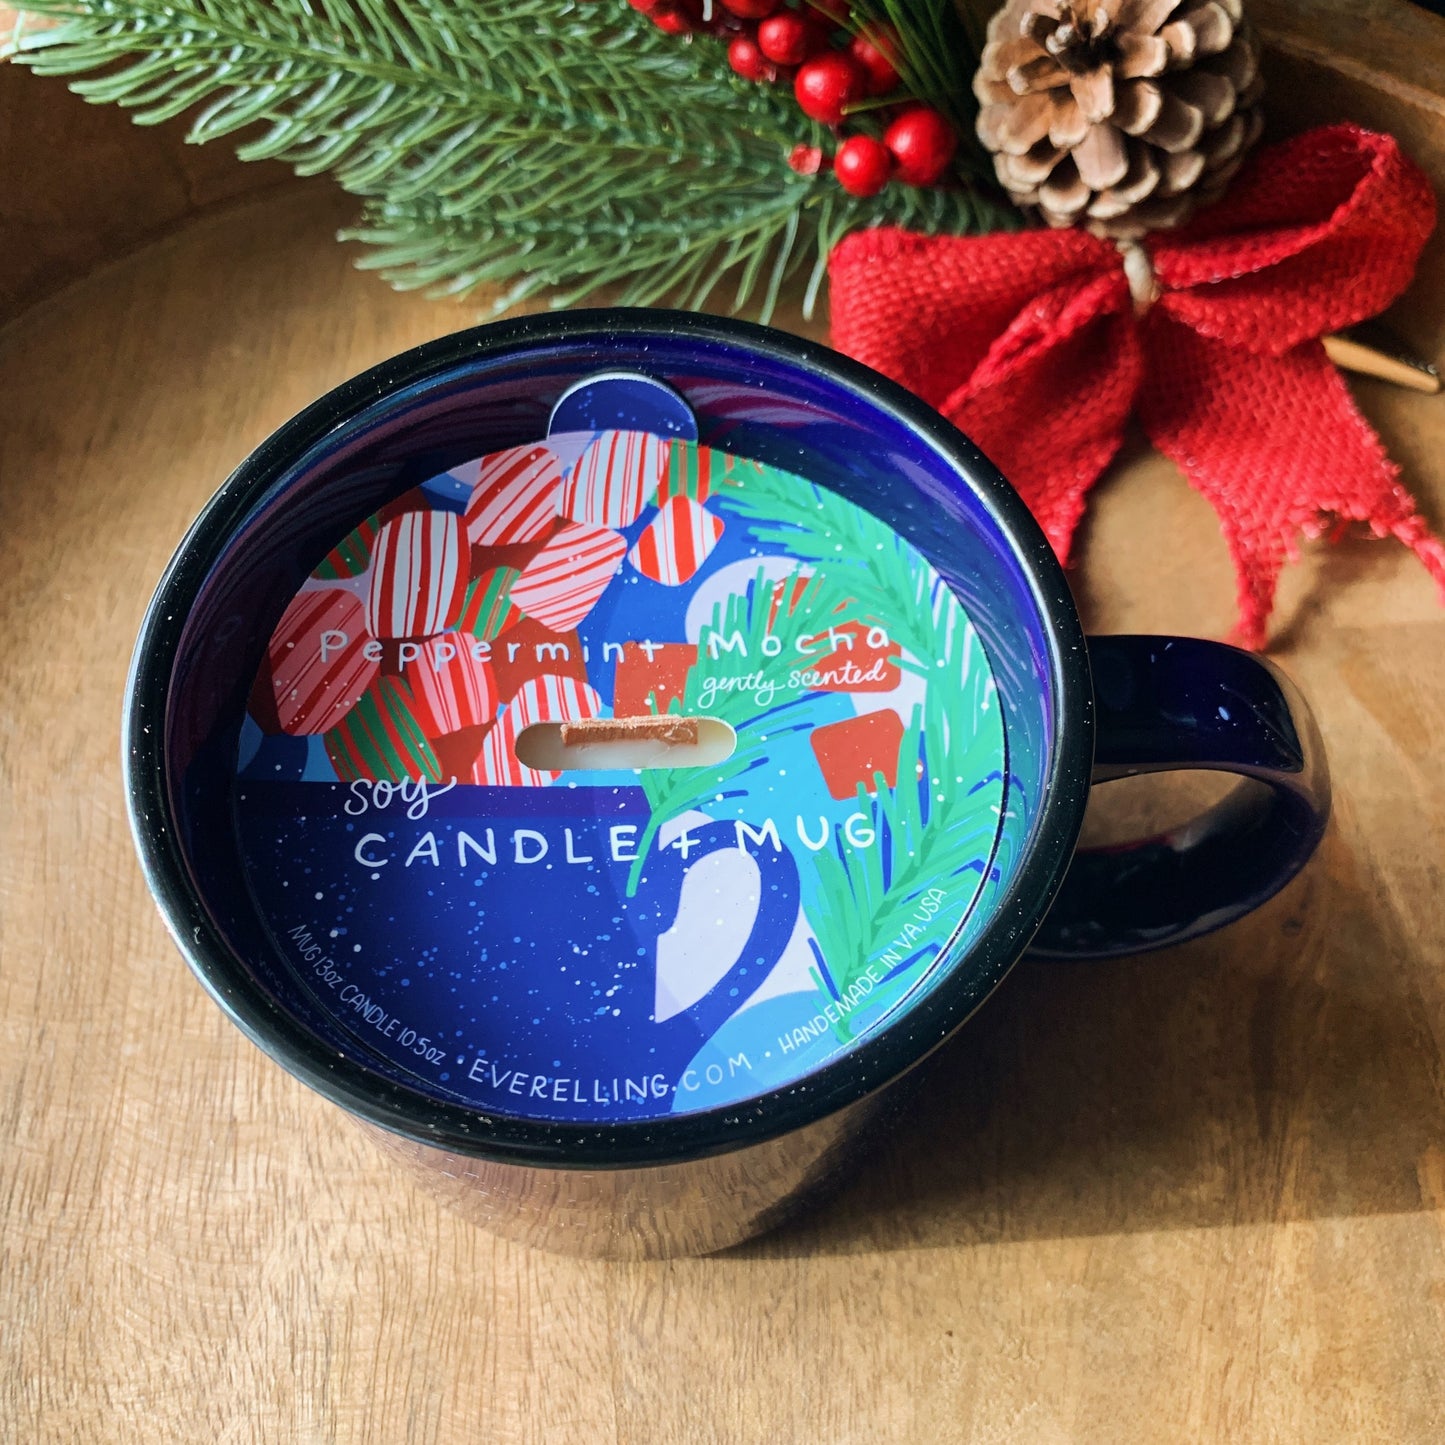 Candle In A Mug - Peppermint Mocha Scented